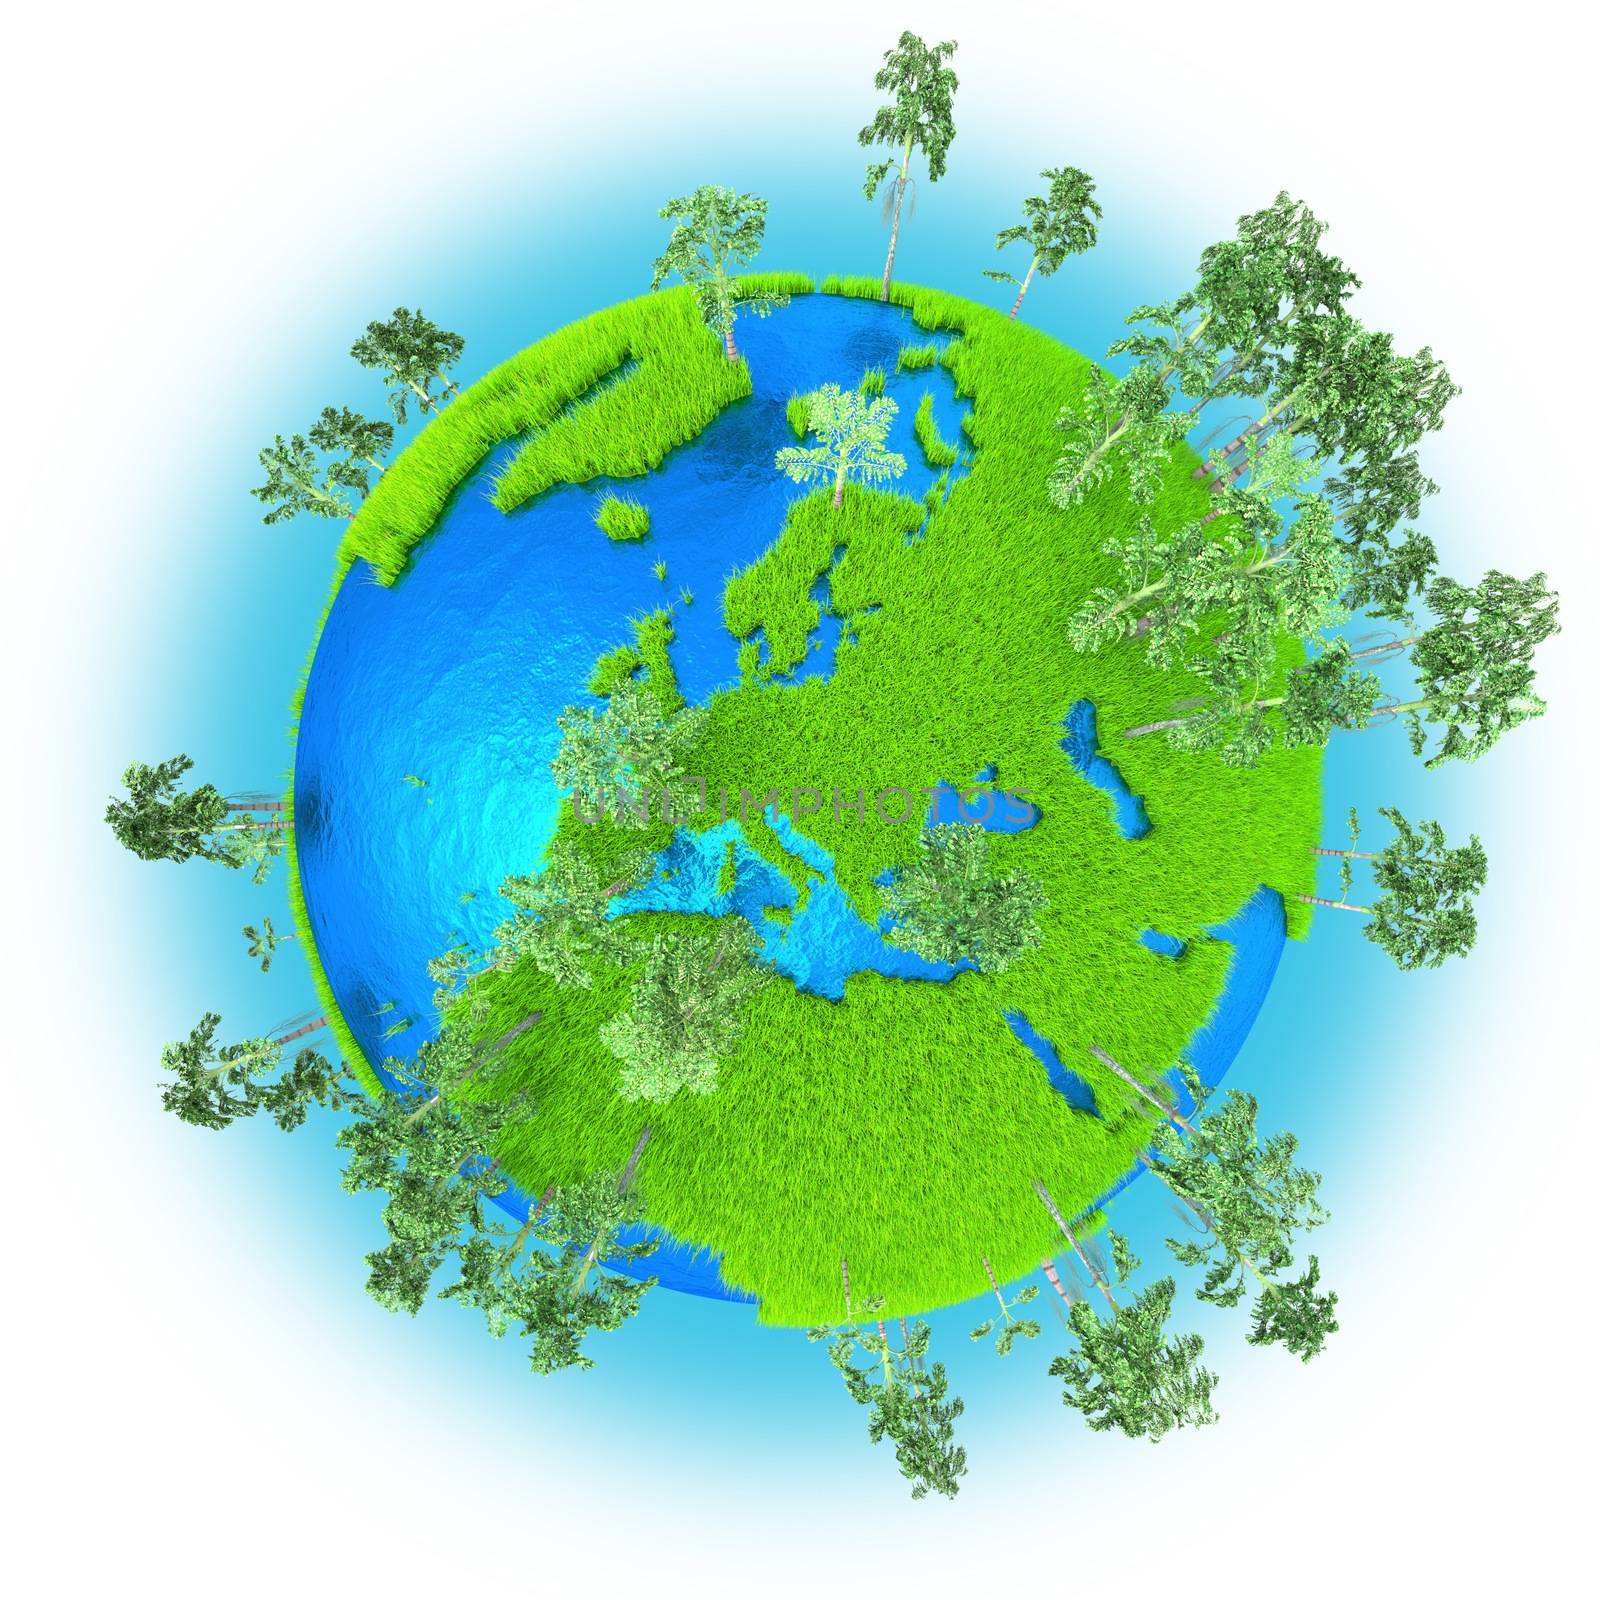 Europe on grassy planet Earth isolated on white background